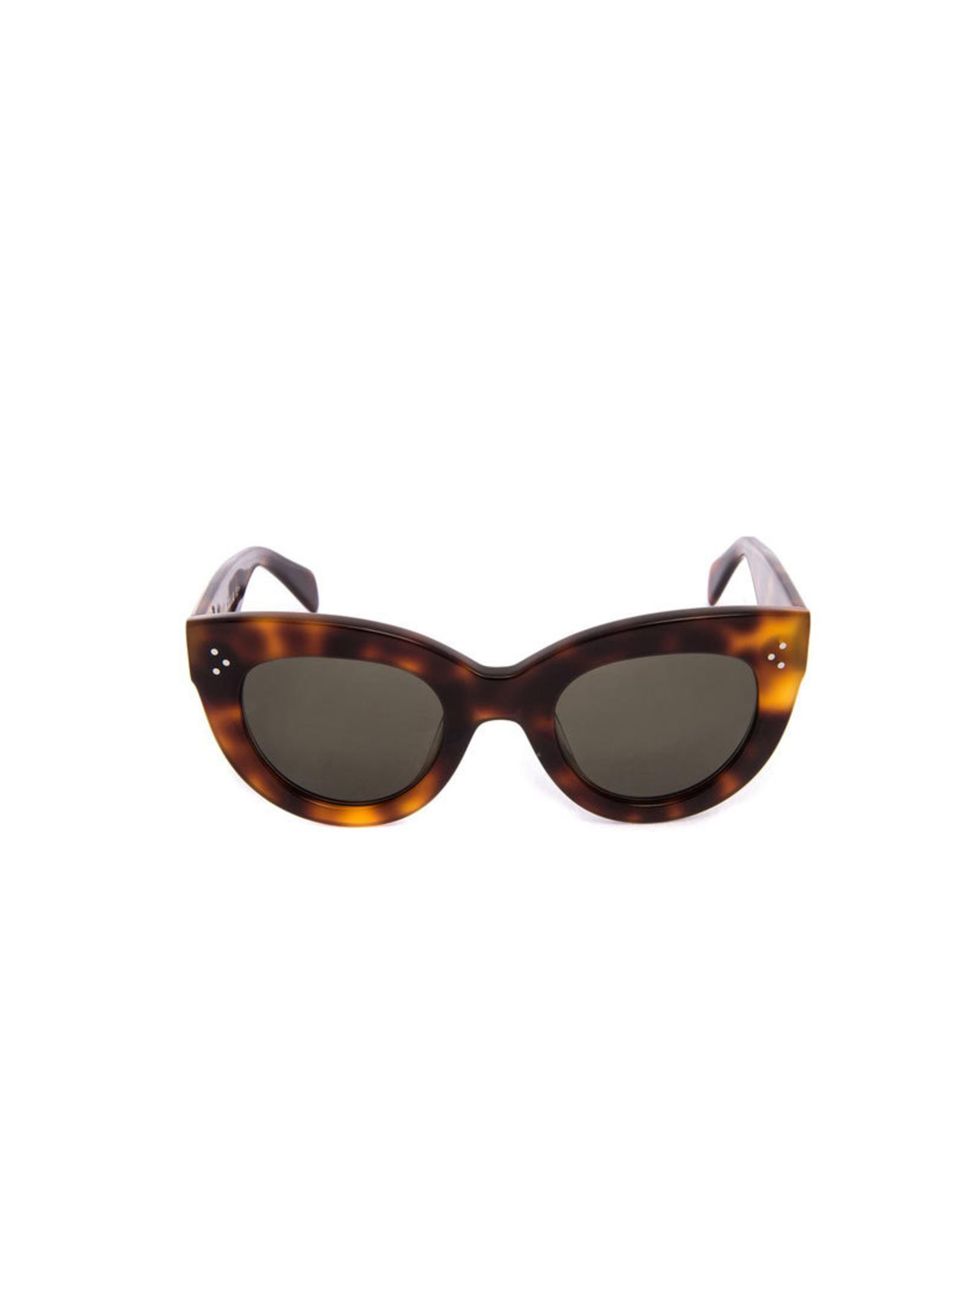 Invest in a great pair of sunglasses.

Celine &pound;210, Matches